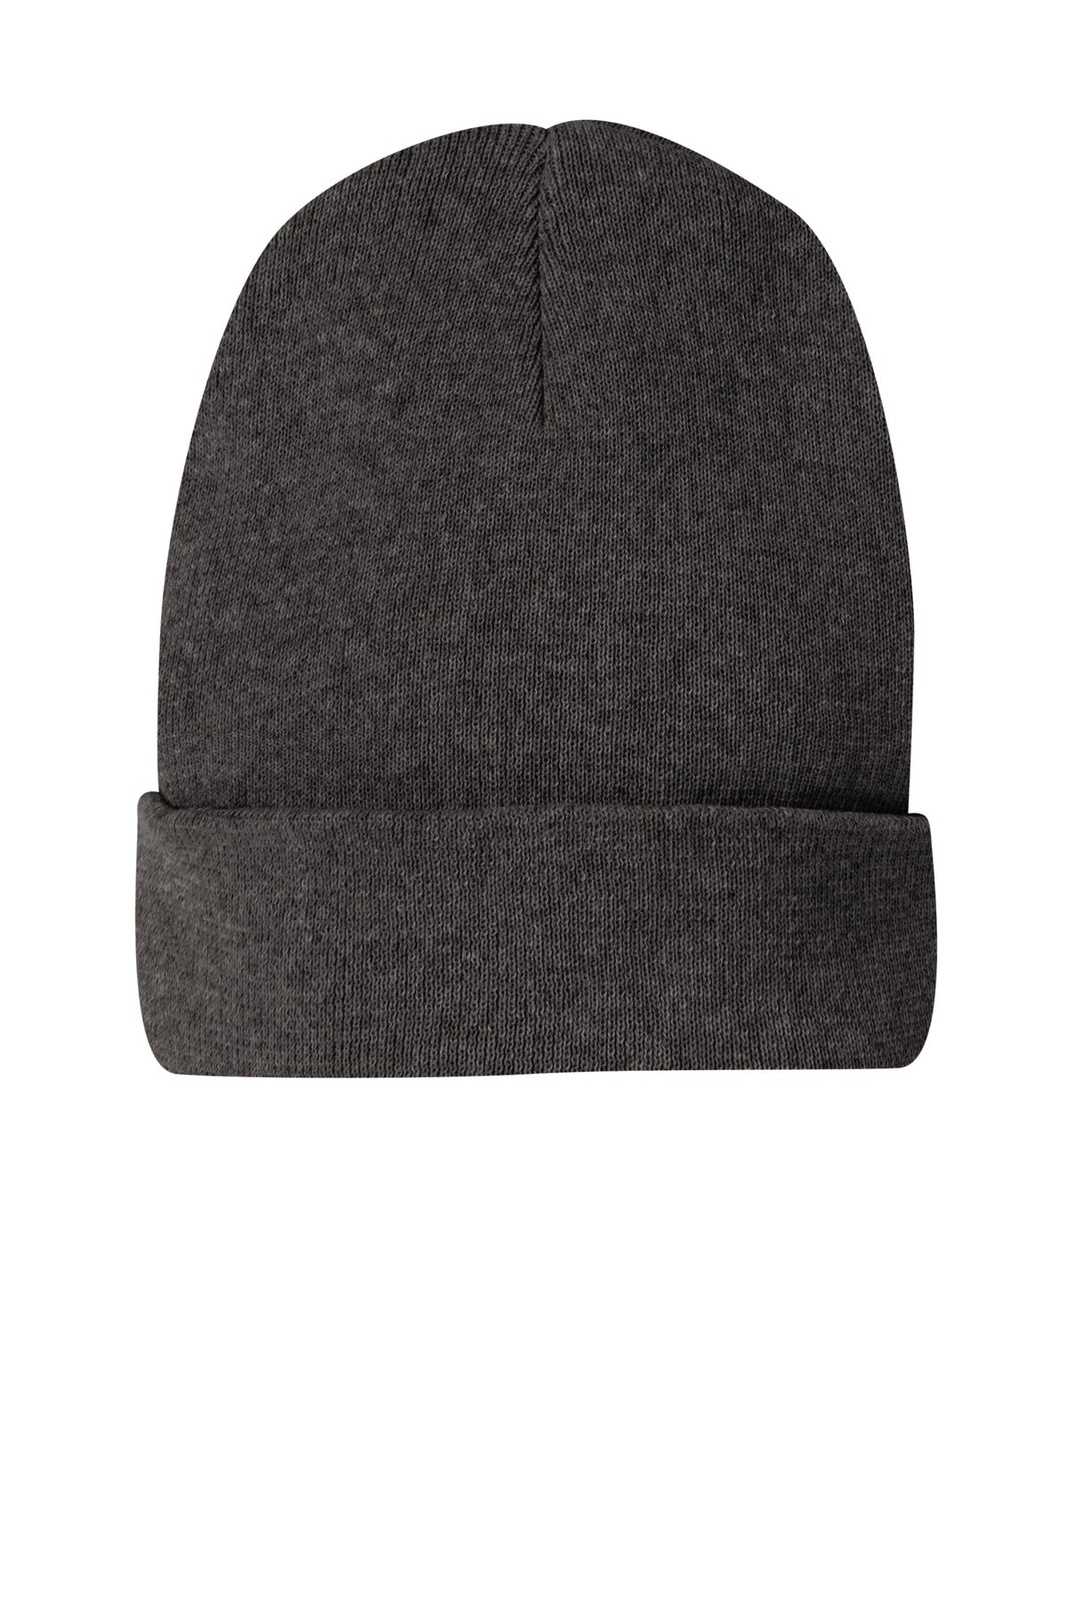 District DT815 Re-Beanie - Charcoal Heather - HIT a Double - 1